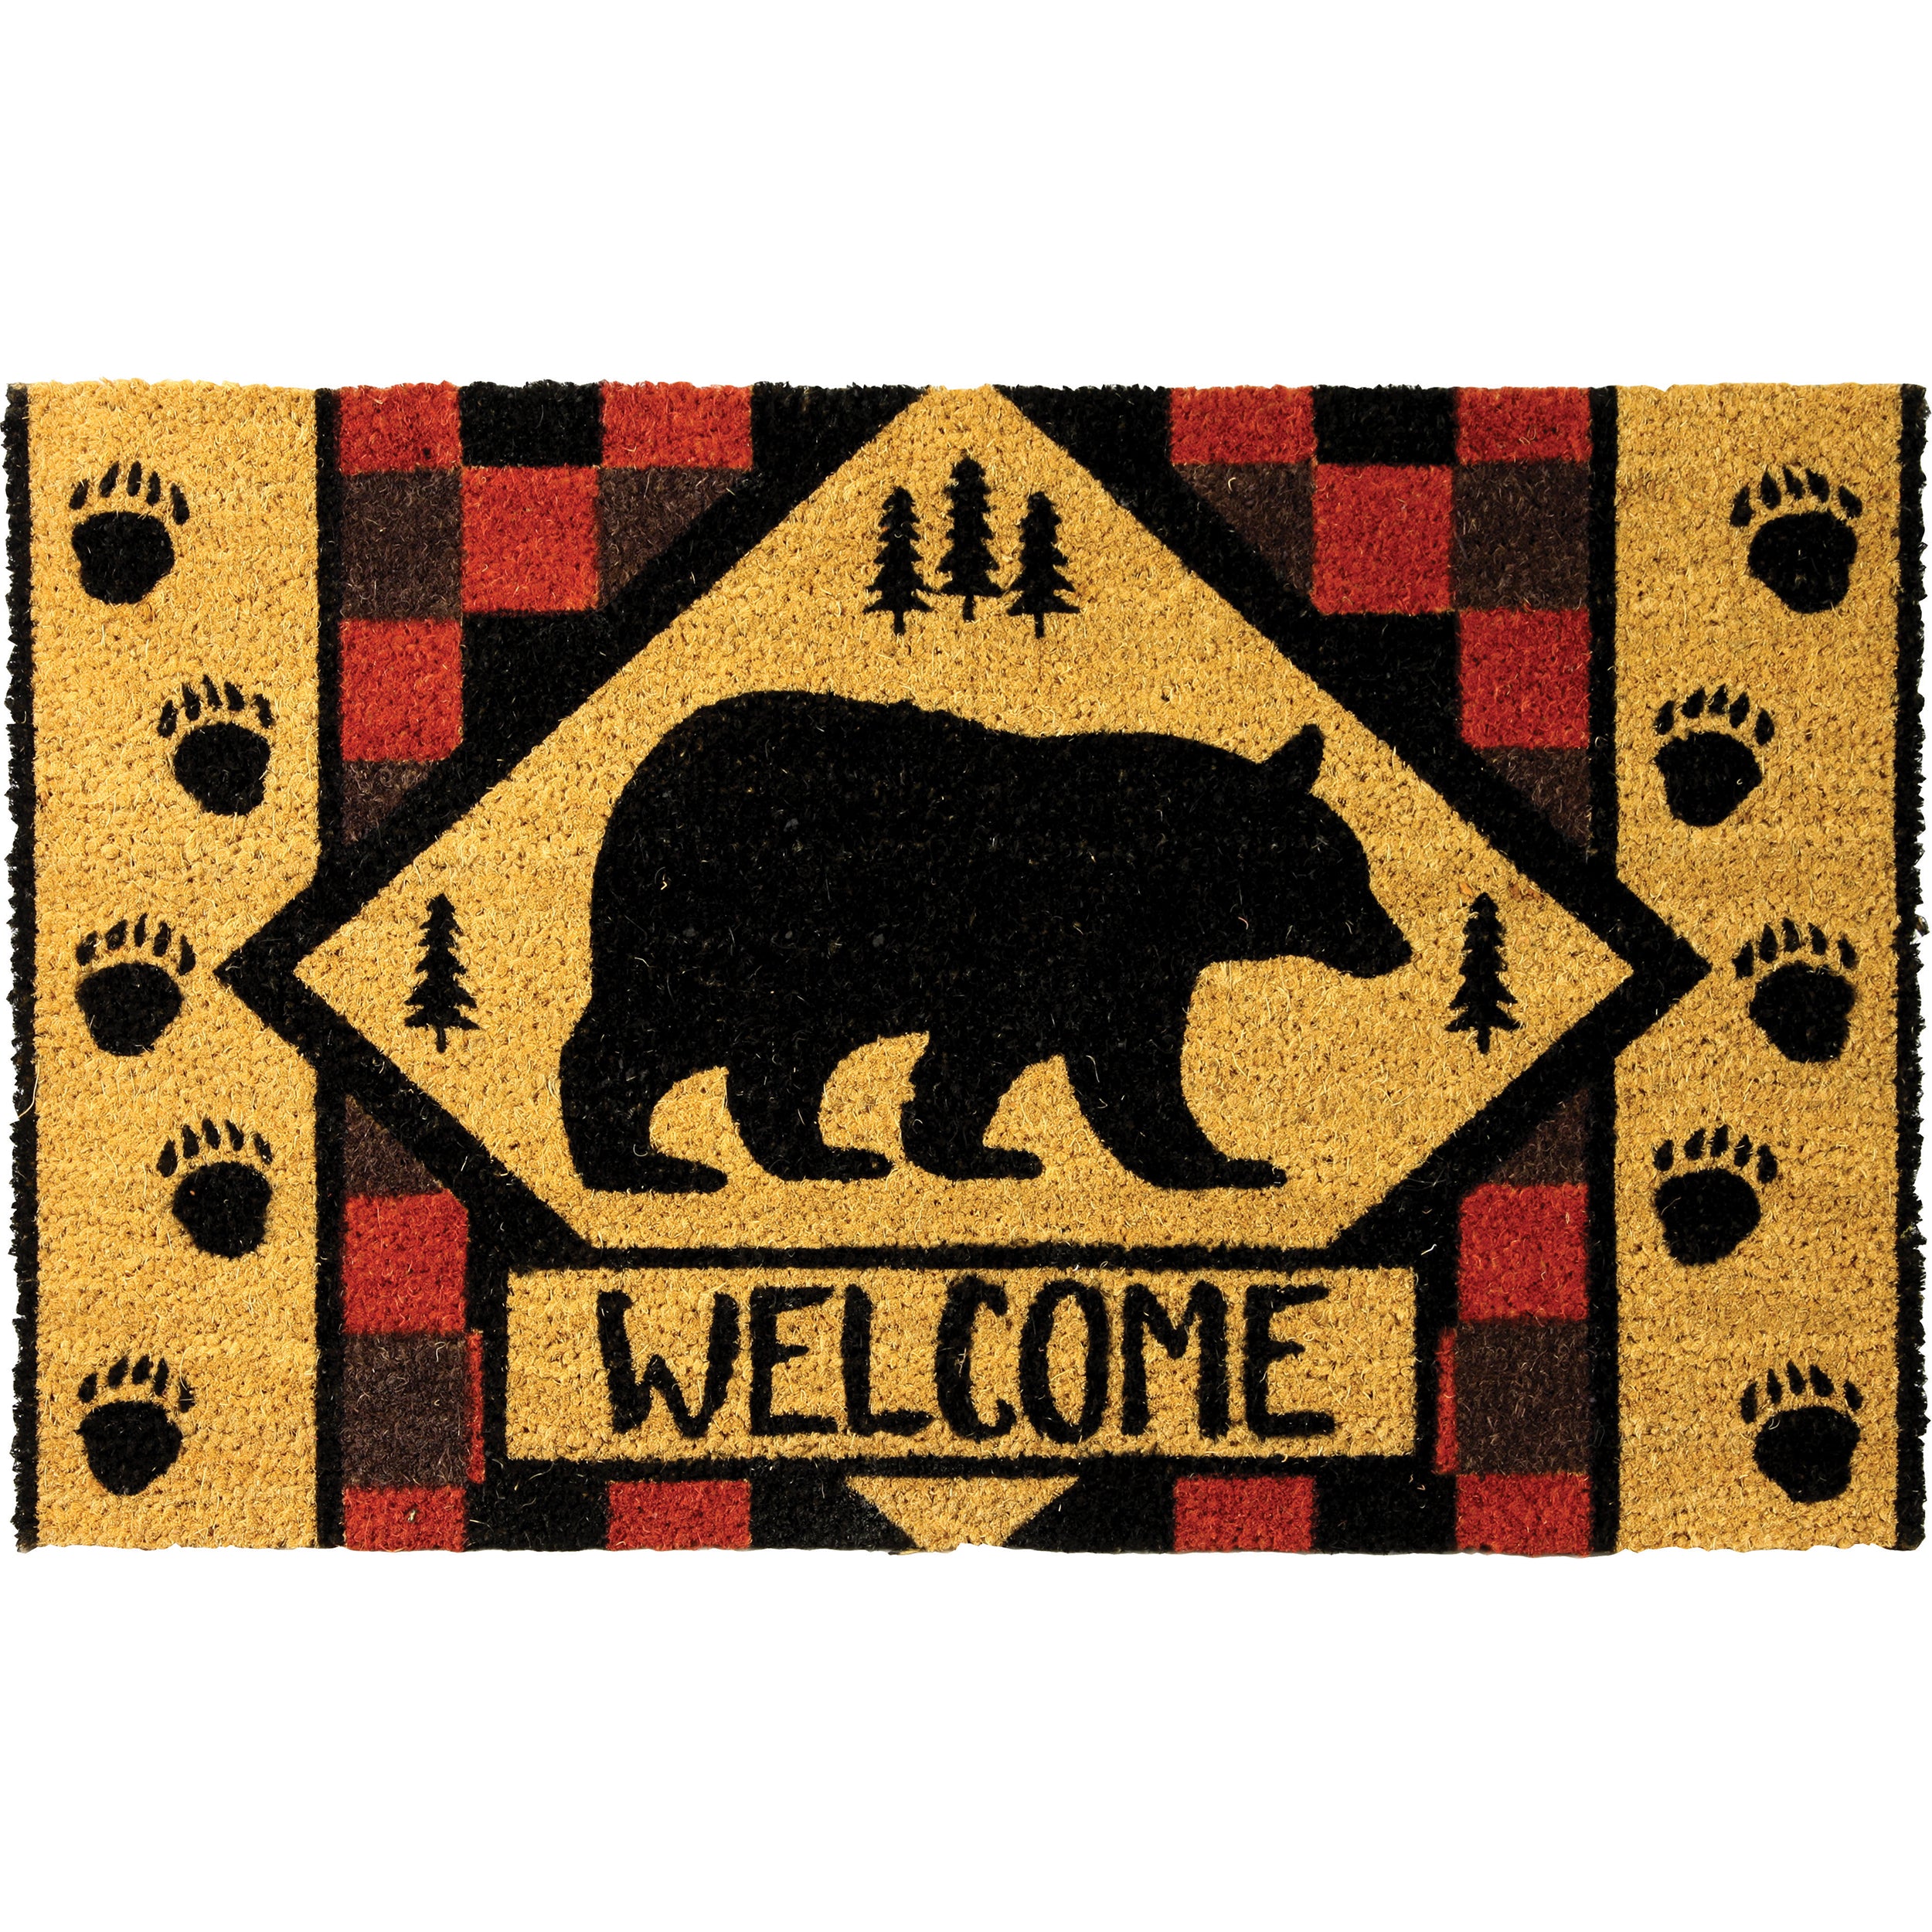 Door Mat Rubber 26-inches by 17-inches - No Soliciting